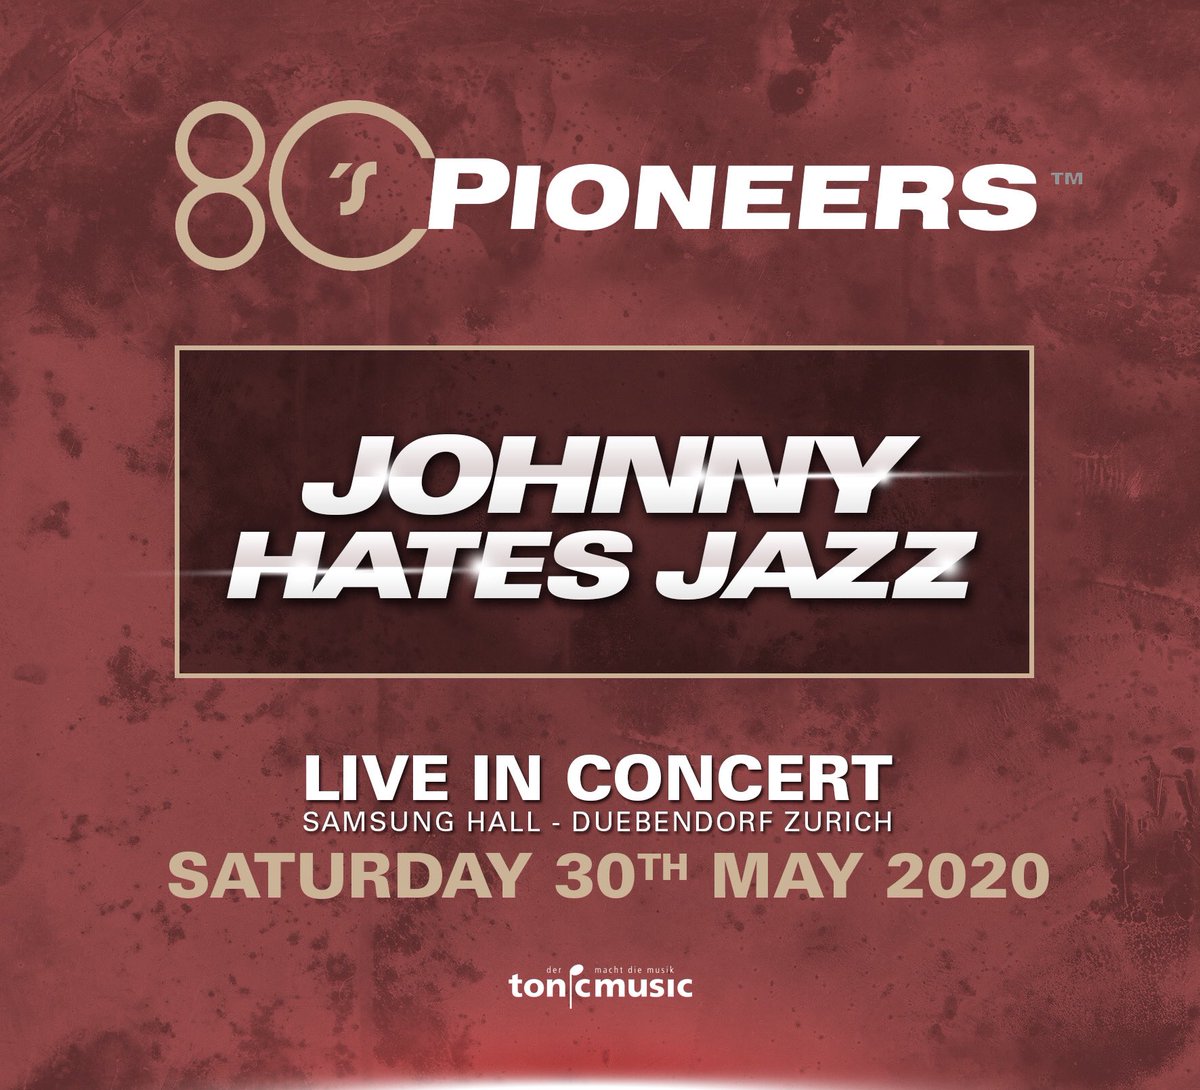 Delighted to announce the last Pioneers for our #Zurich show on May 30: @ClarkDatchler +  Mike Nocito from #johnnyhatesjazz These 2 fine musicians are a great addition to our billing @SteveNormanReal @musikagentur #80spioneers #shattereddreams #80sMusic #tripdownmemorylane #80s